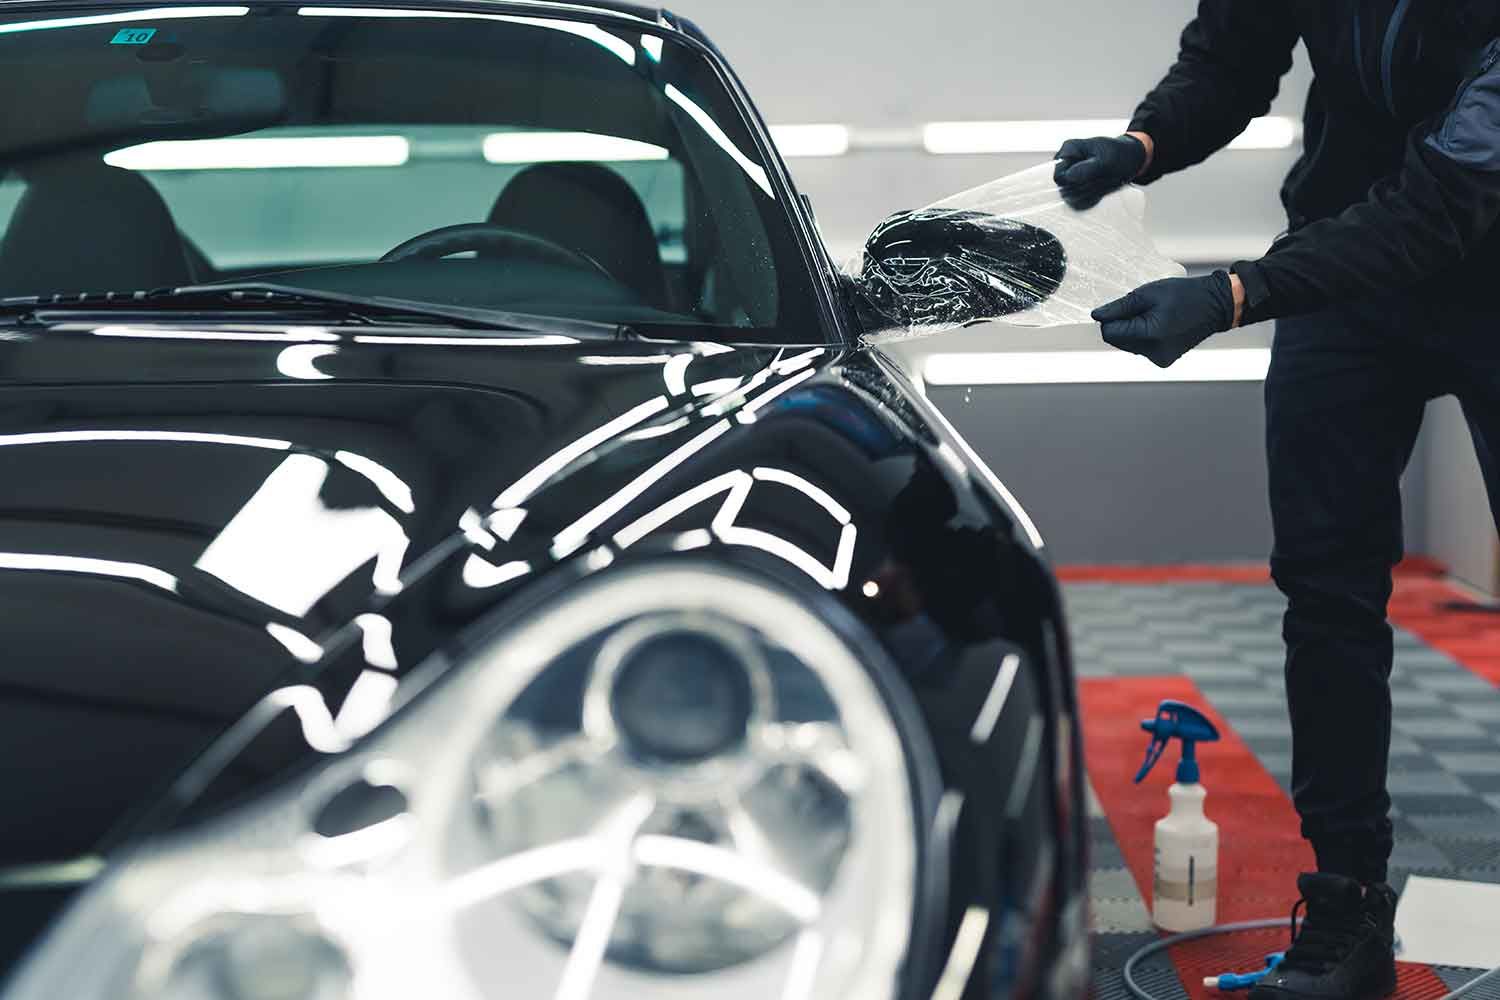 how much is paint protection film?